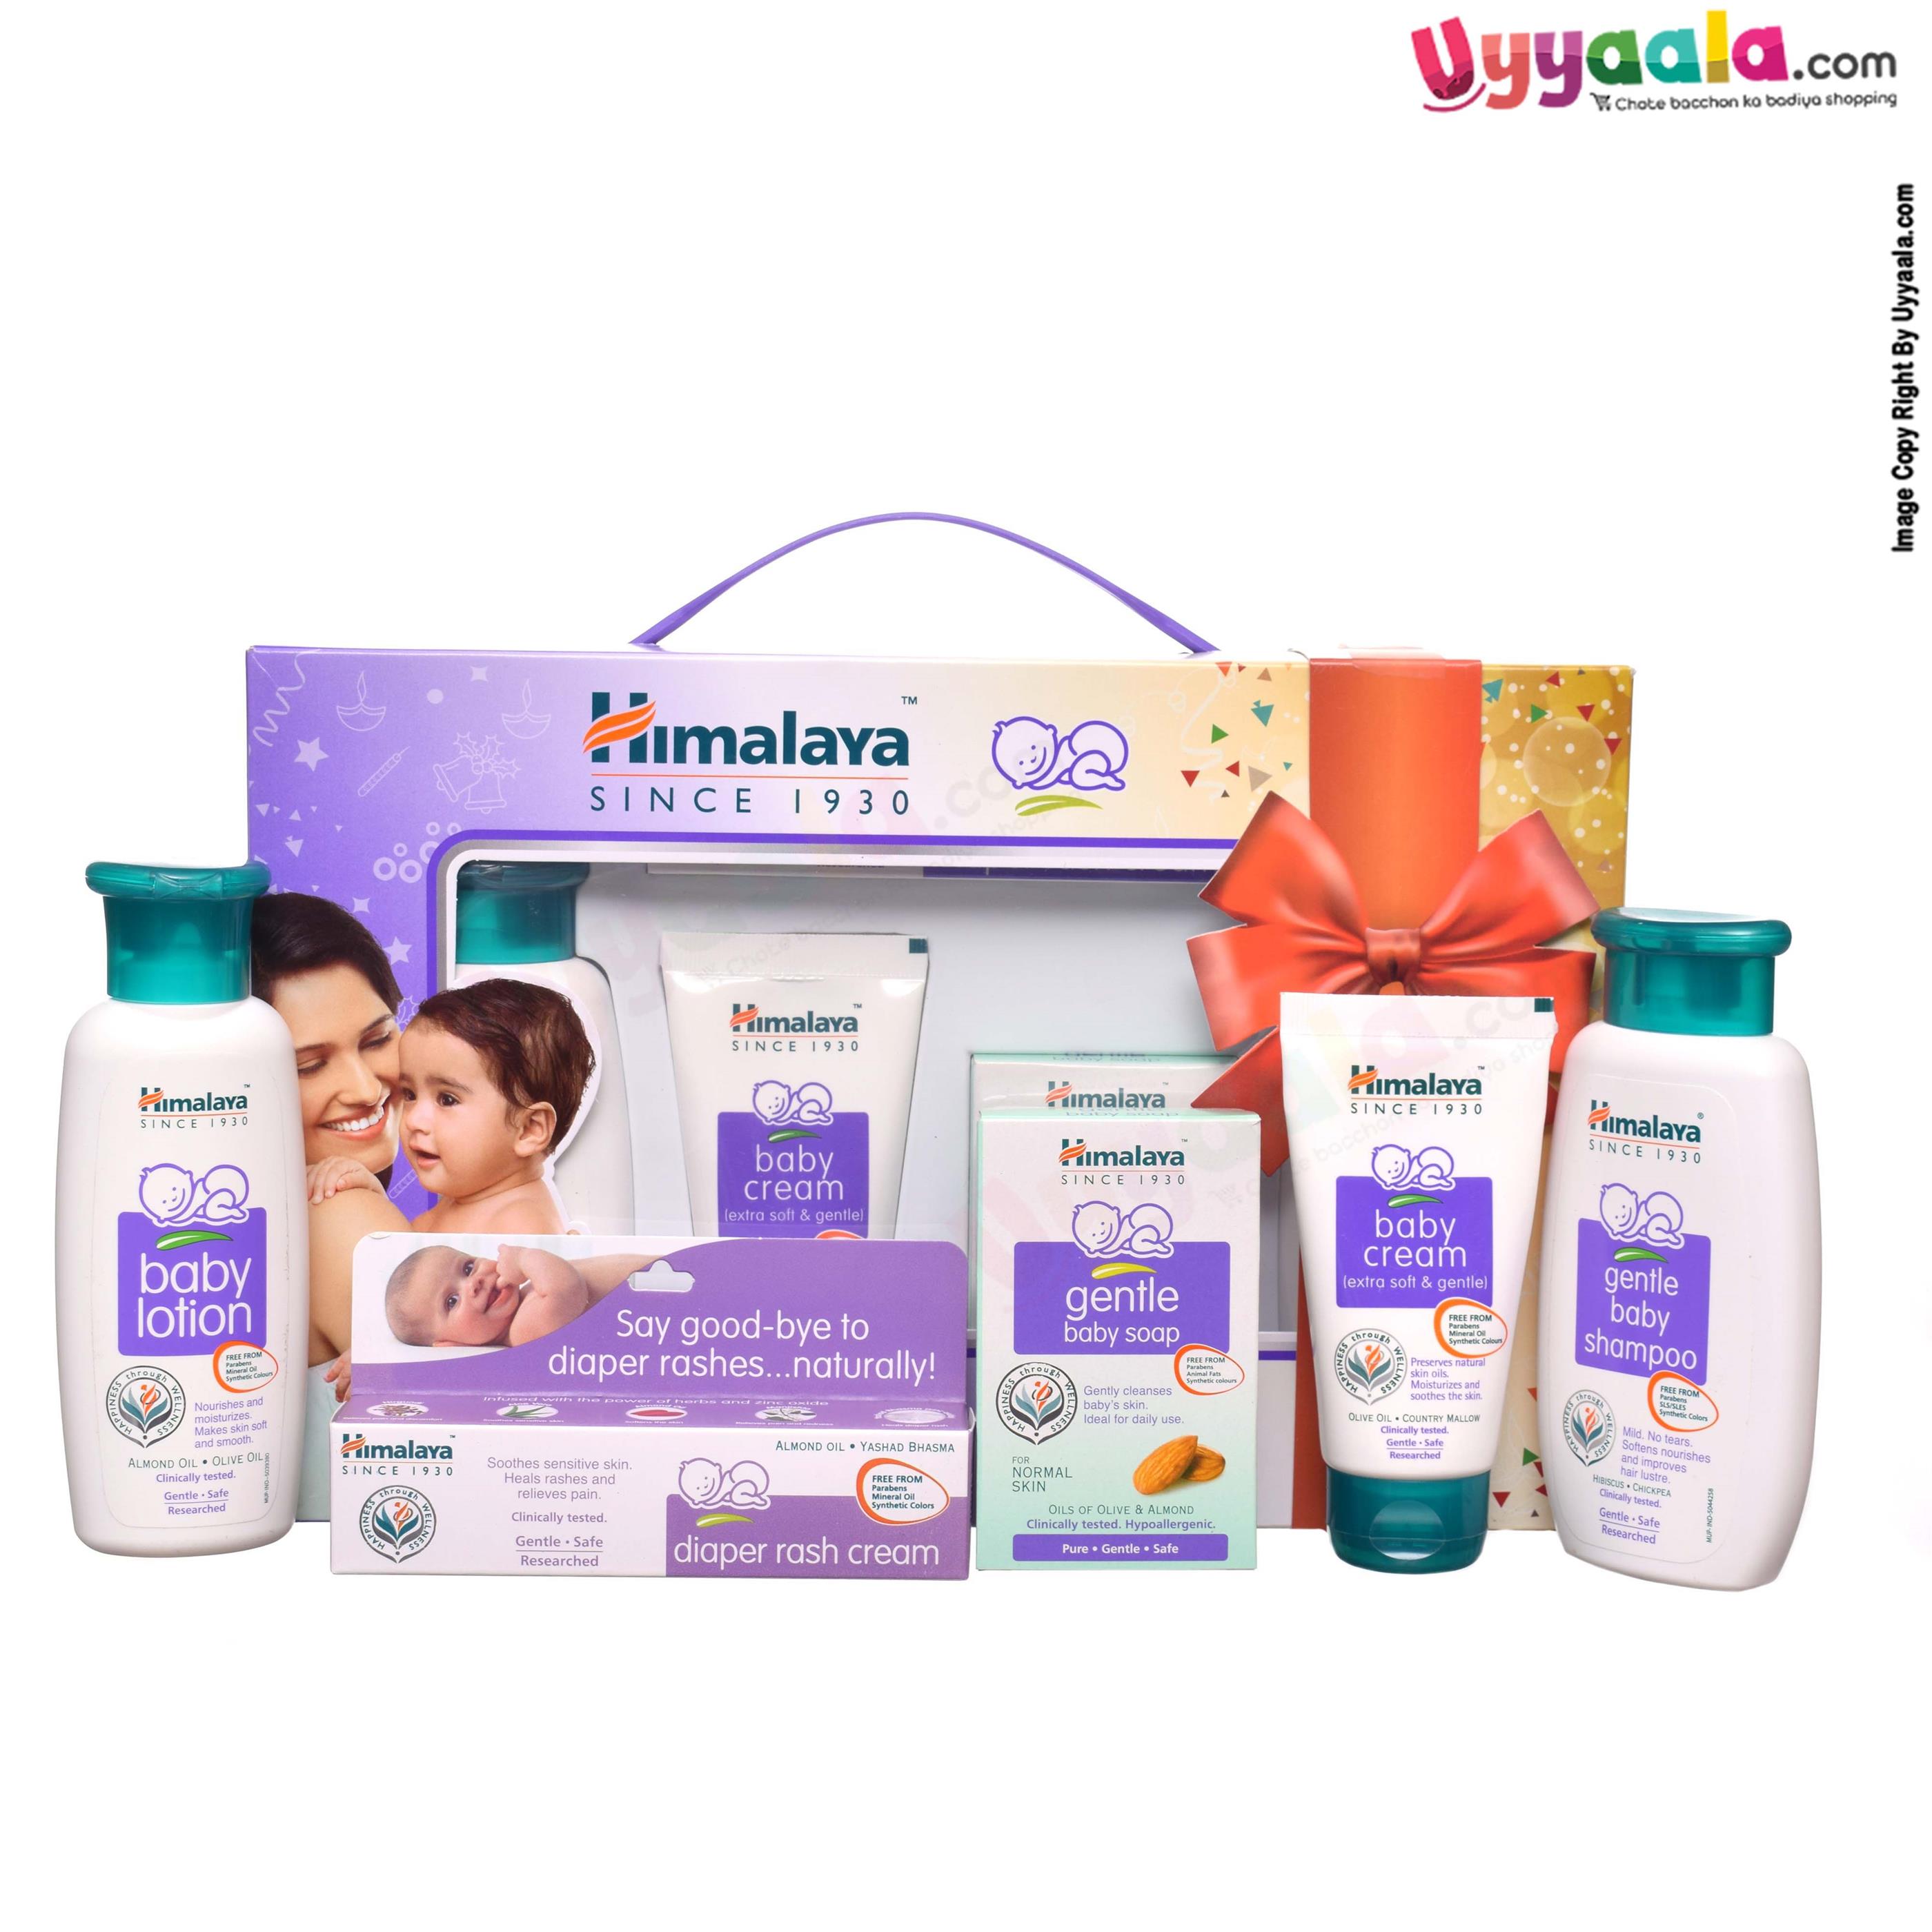 Himalaya baby products review | Himalaya baby product gift pack | Best baby  product soap oil powder - YouTube